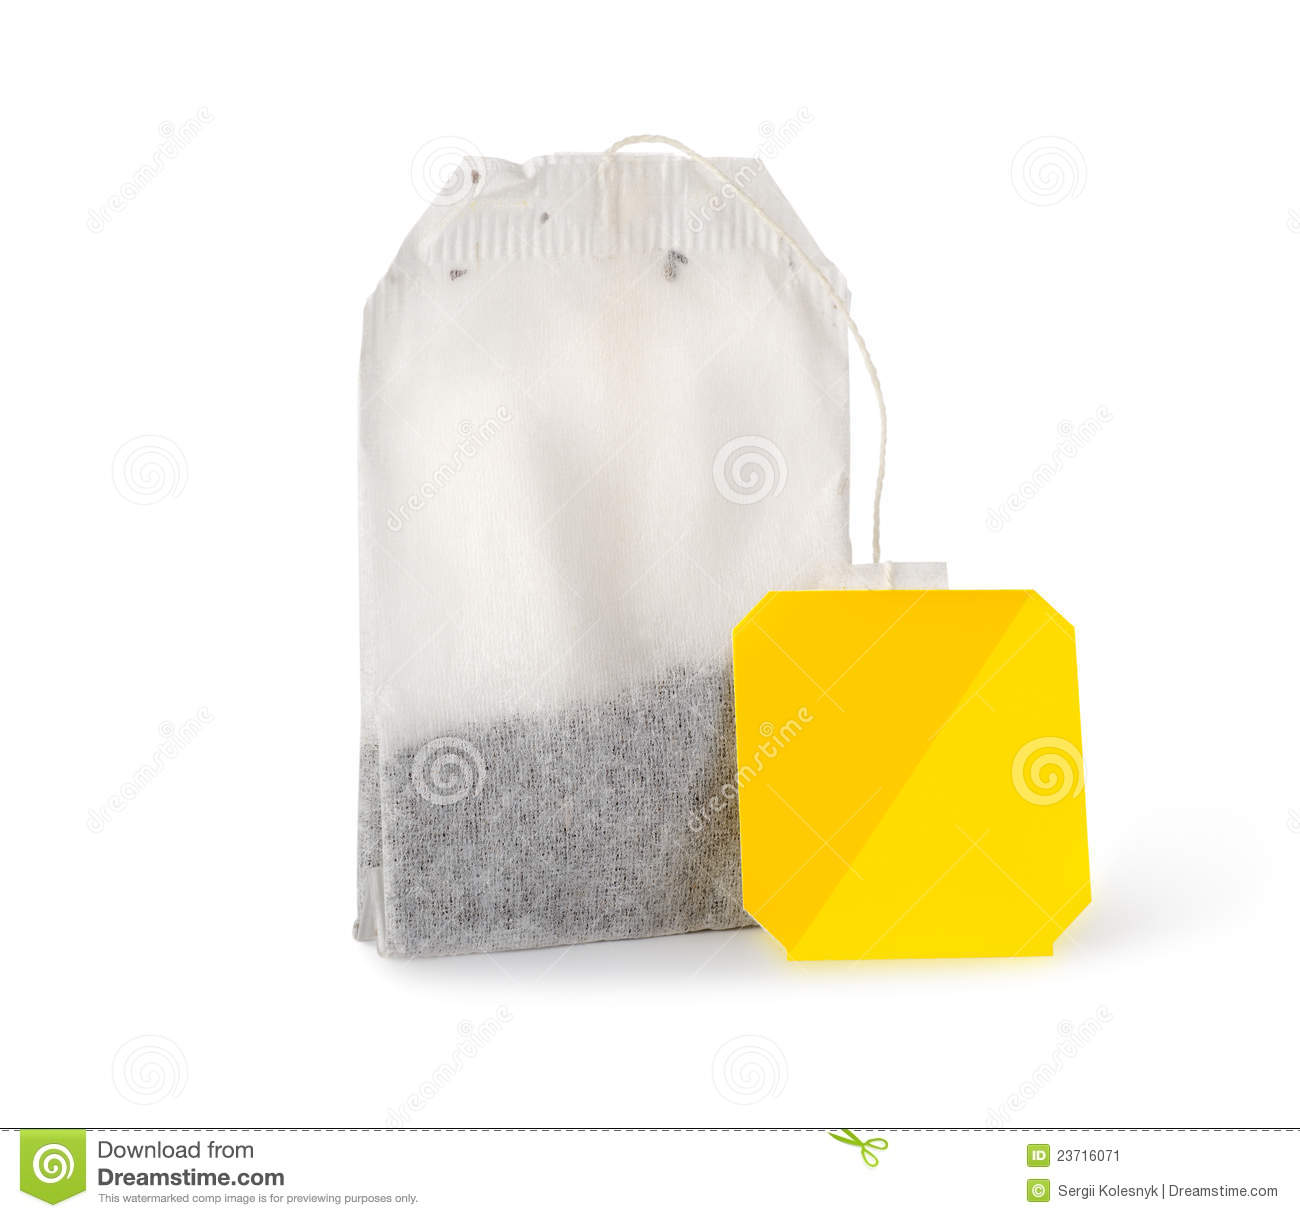 Single Tea Bag Of Black Tea With Yellow Label Isolated On A White